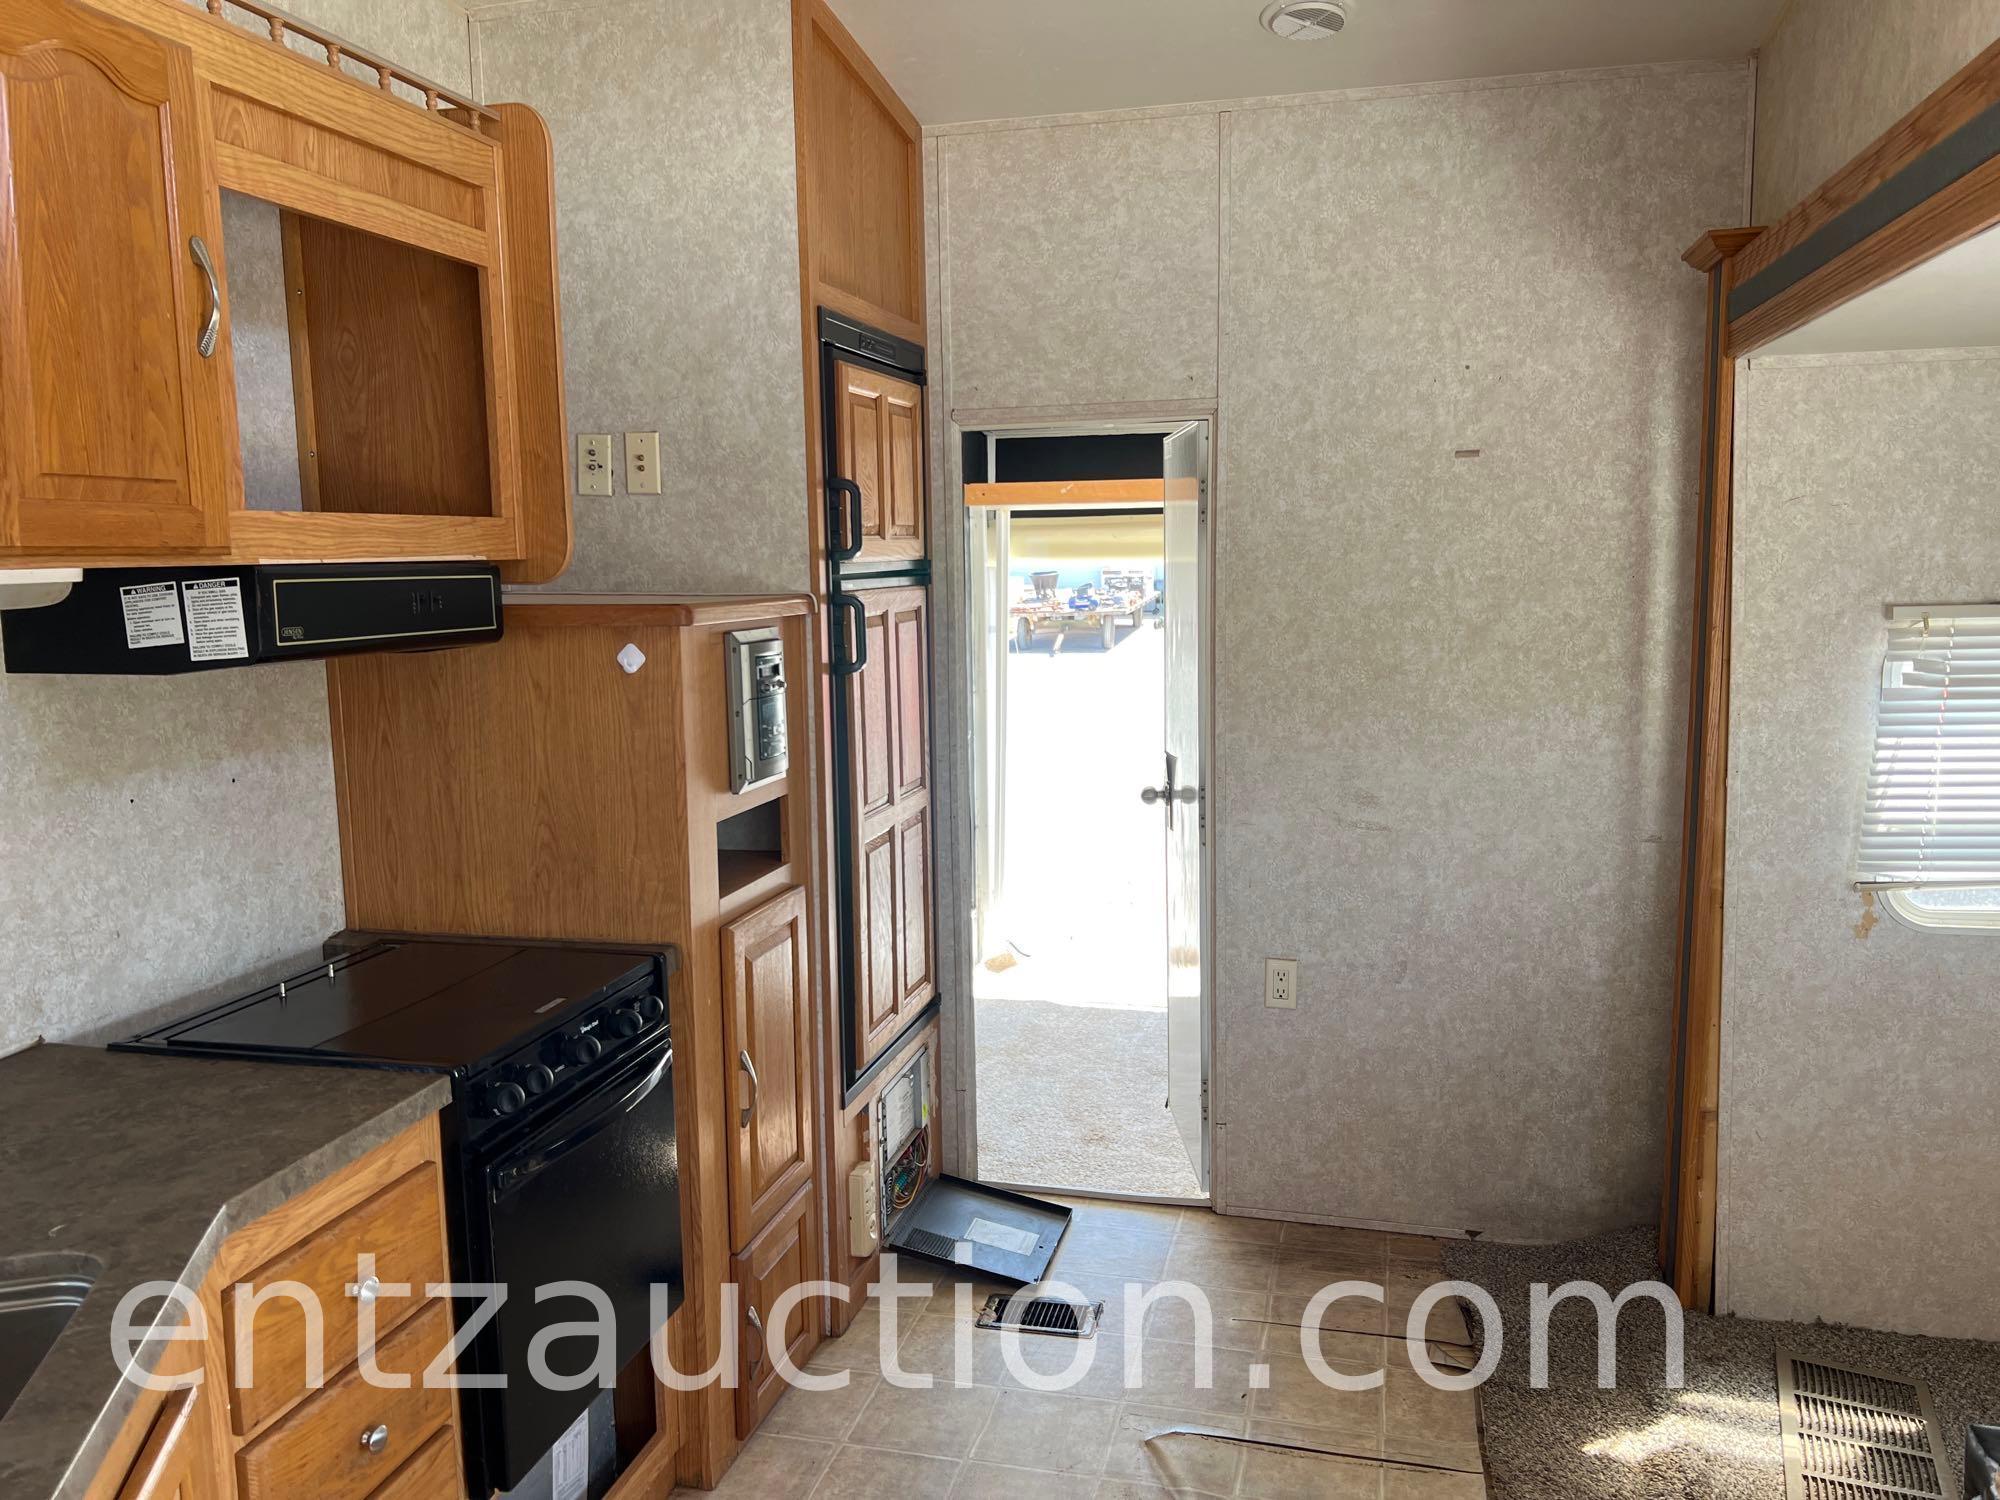 2004 FOREST RIVER 5TH WHEEL TRAVEL TRAILER, 35',